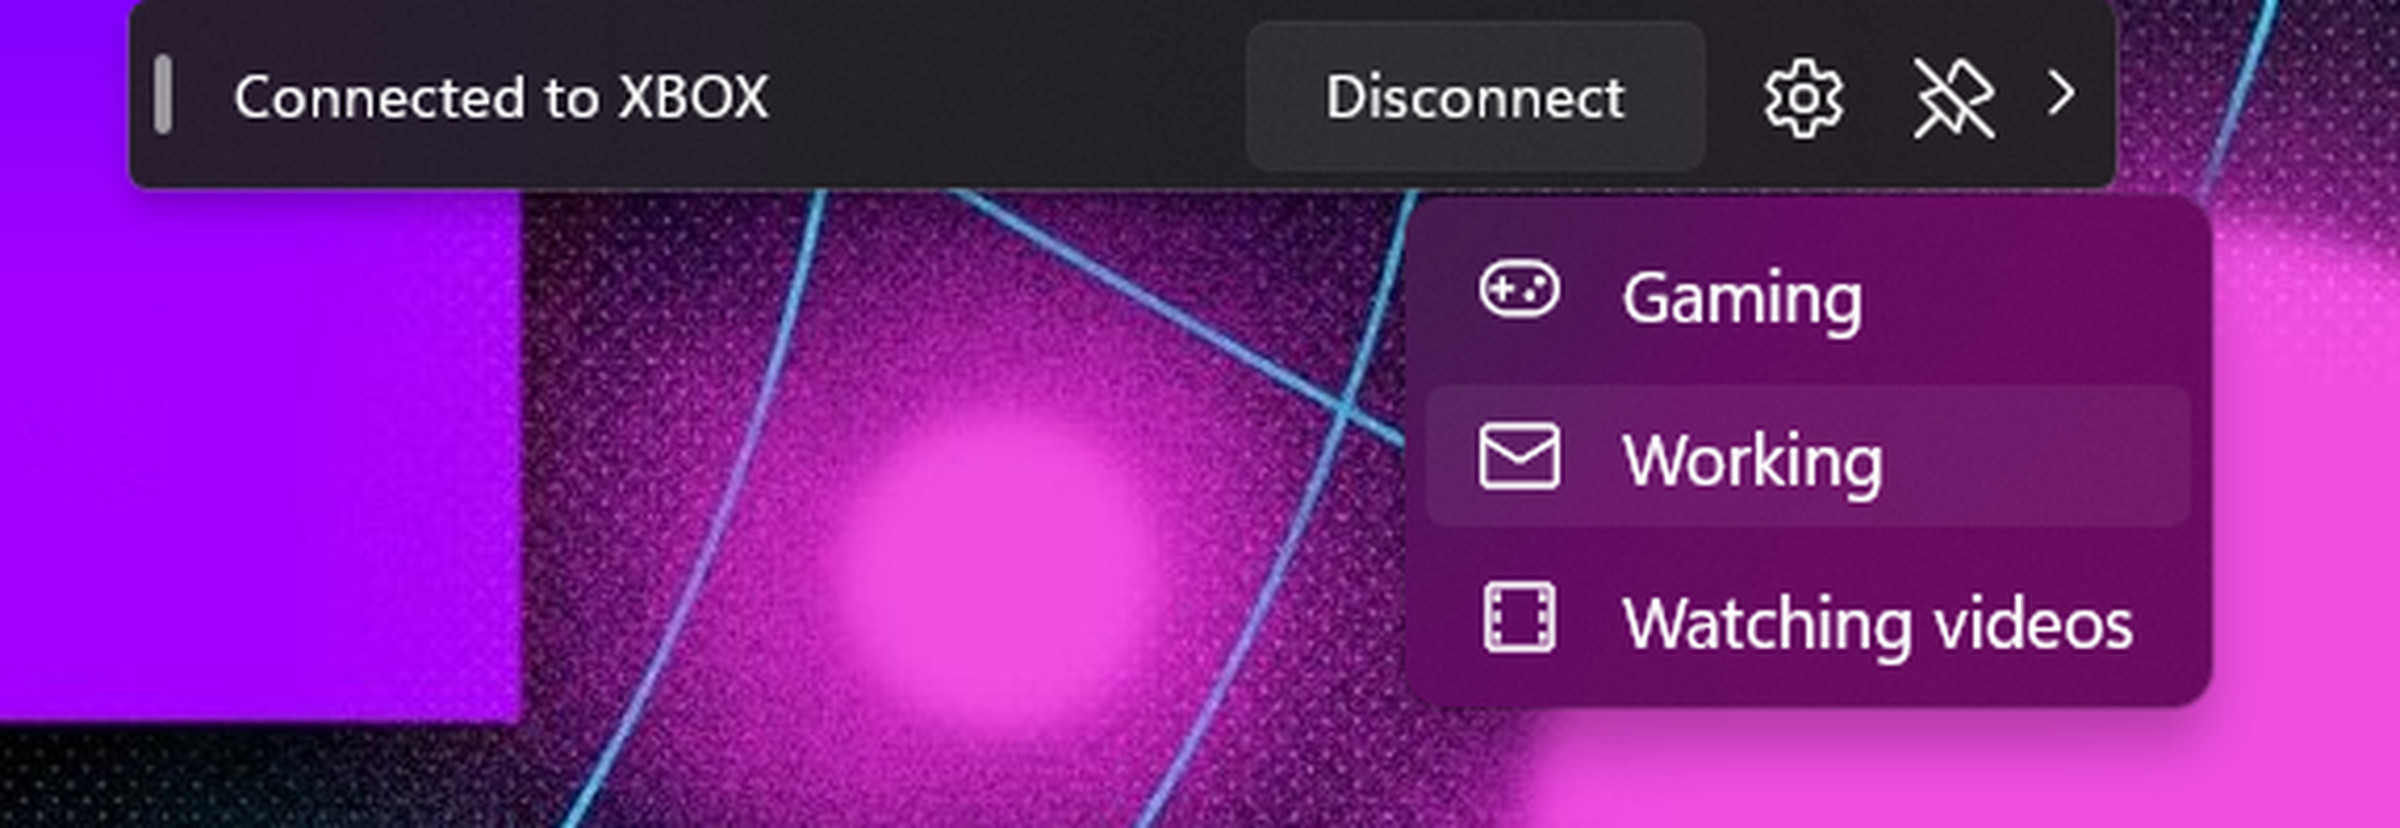 This small taskbar gives you easy access to streaming modes and disconnecting.